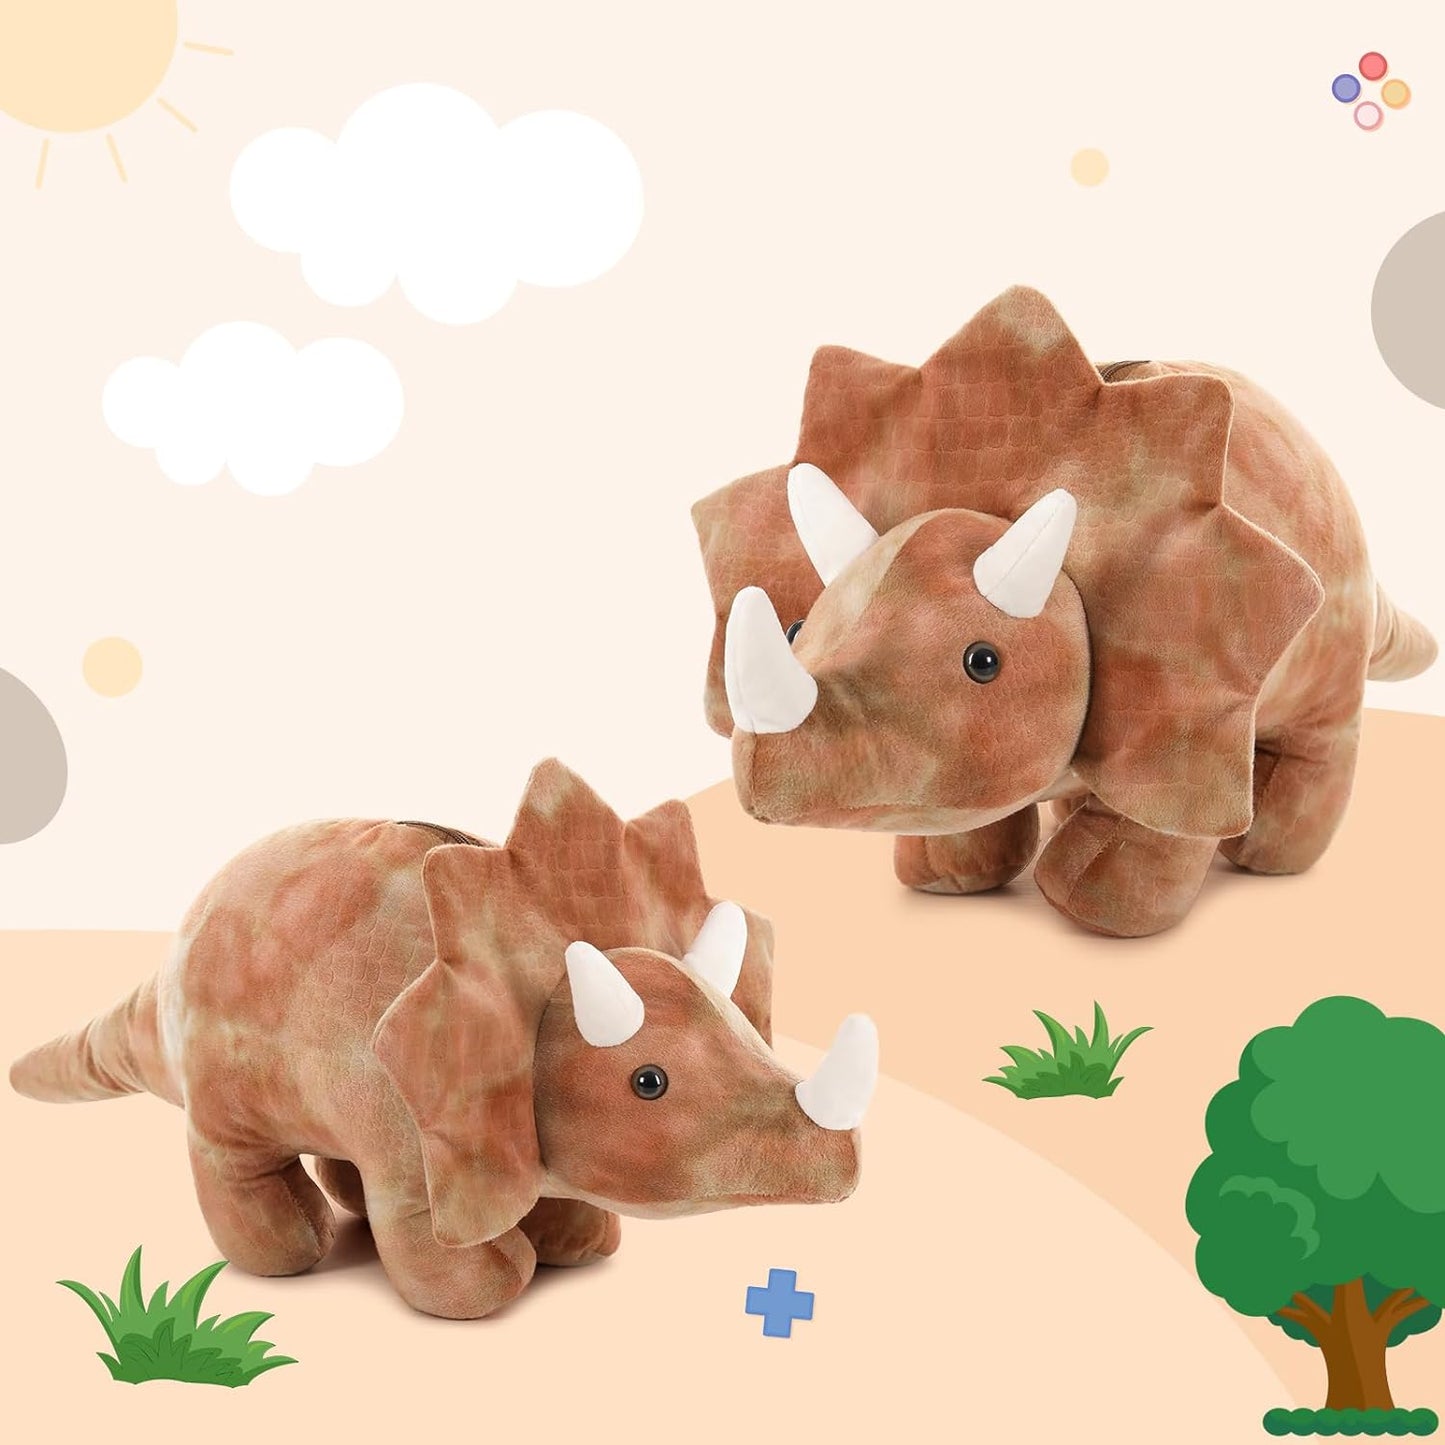 Dinosaur Plush Toy Triceratops Stuffed Toy, 24.5 Inches